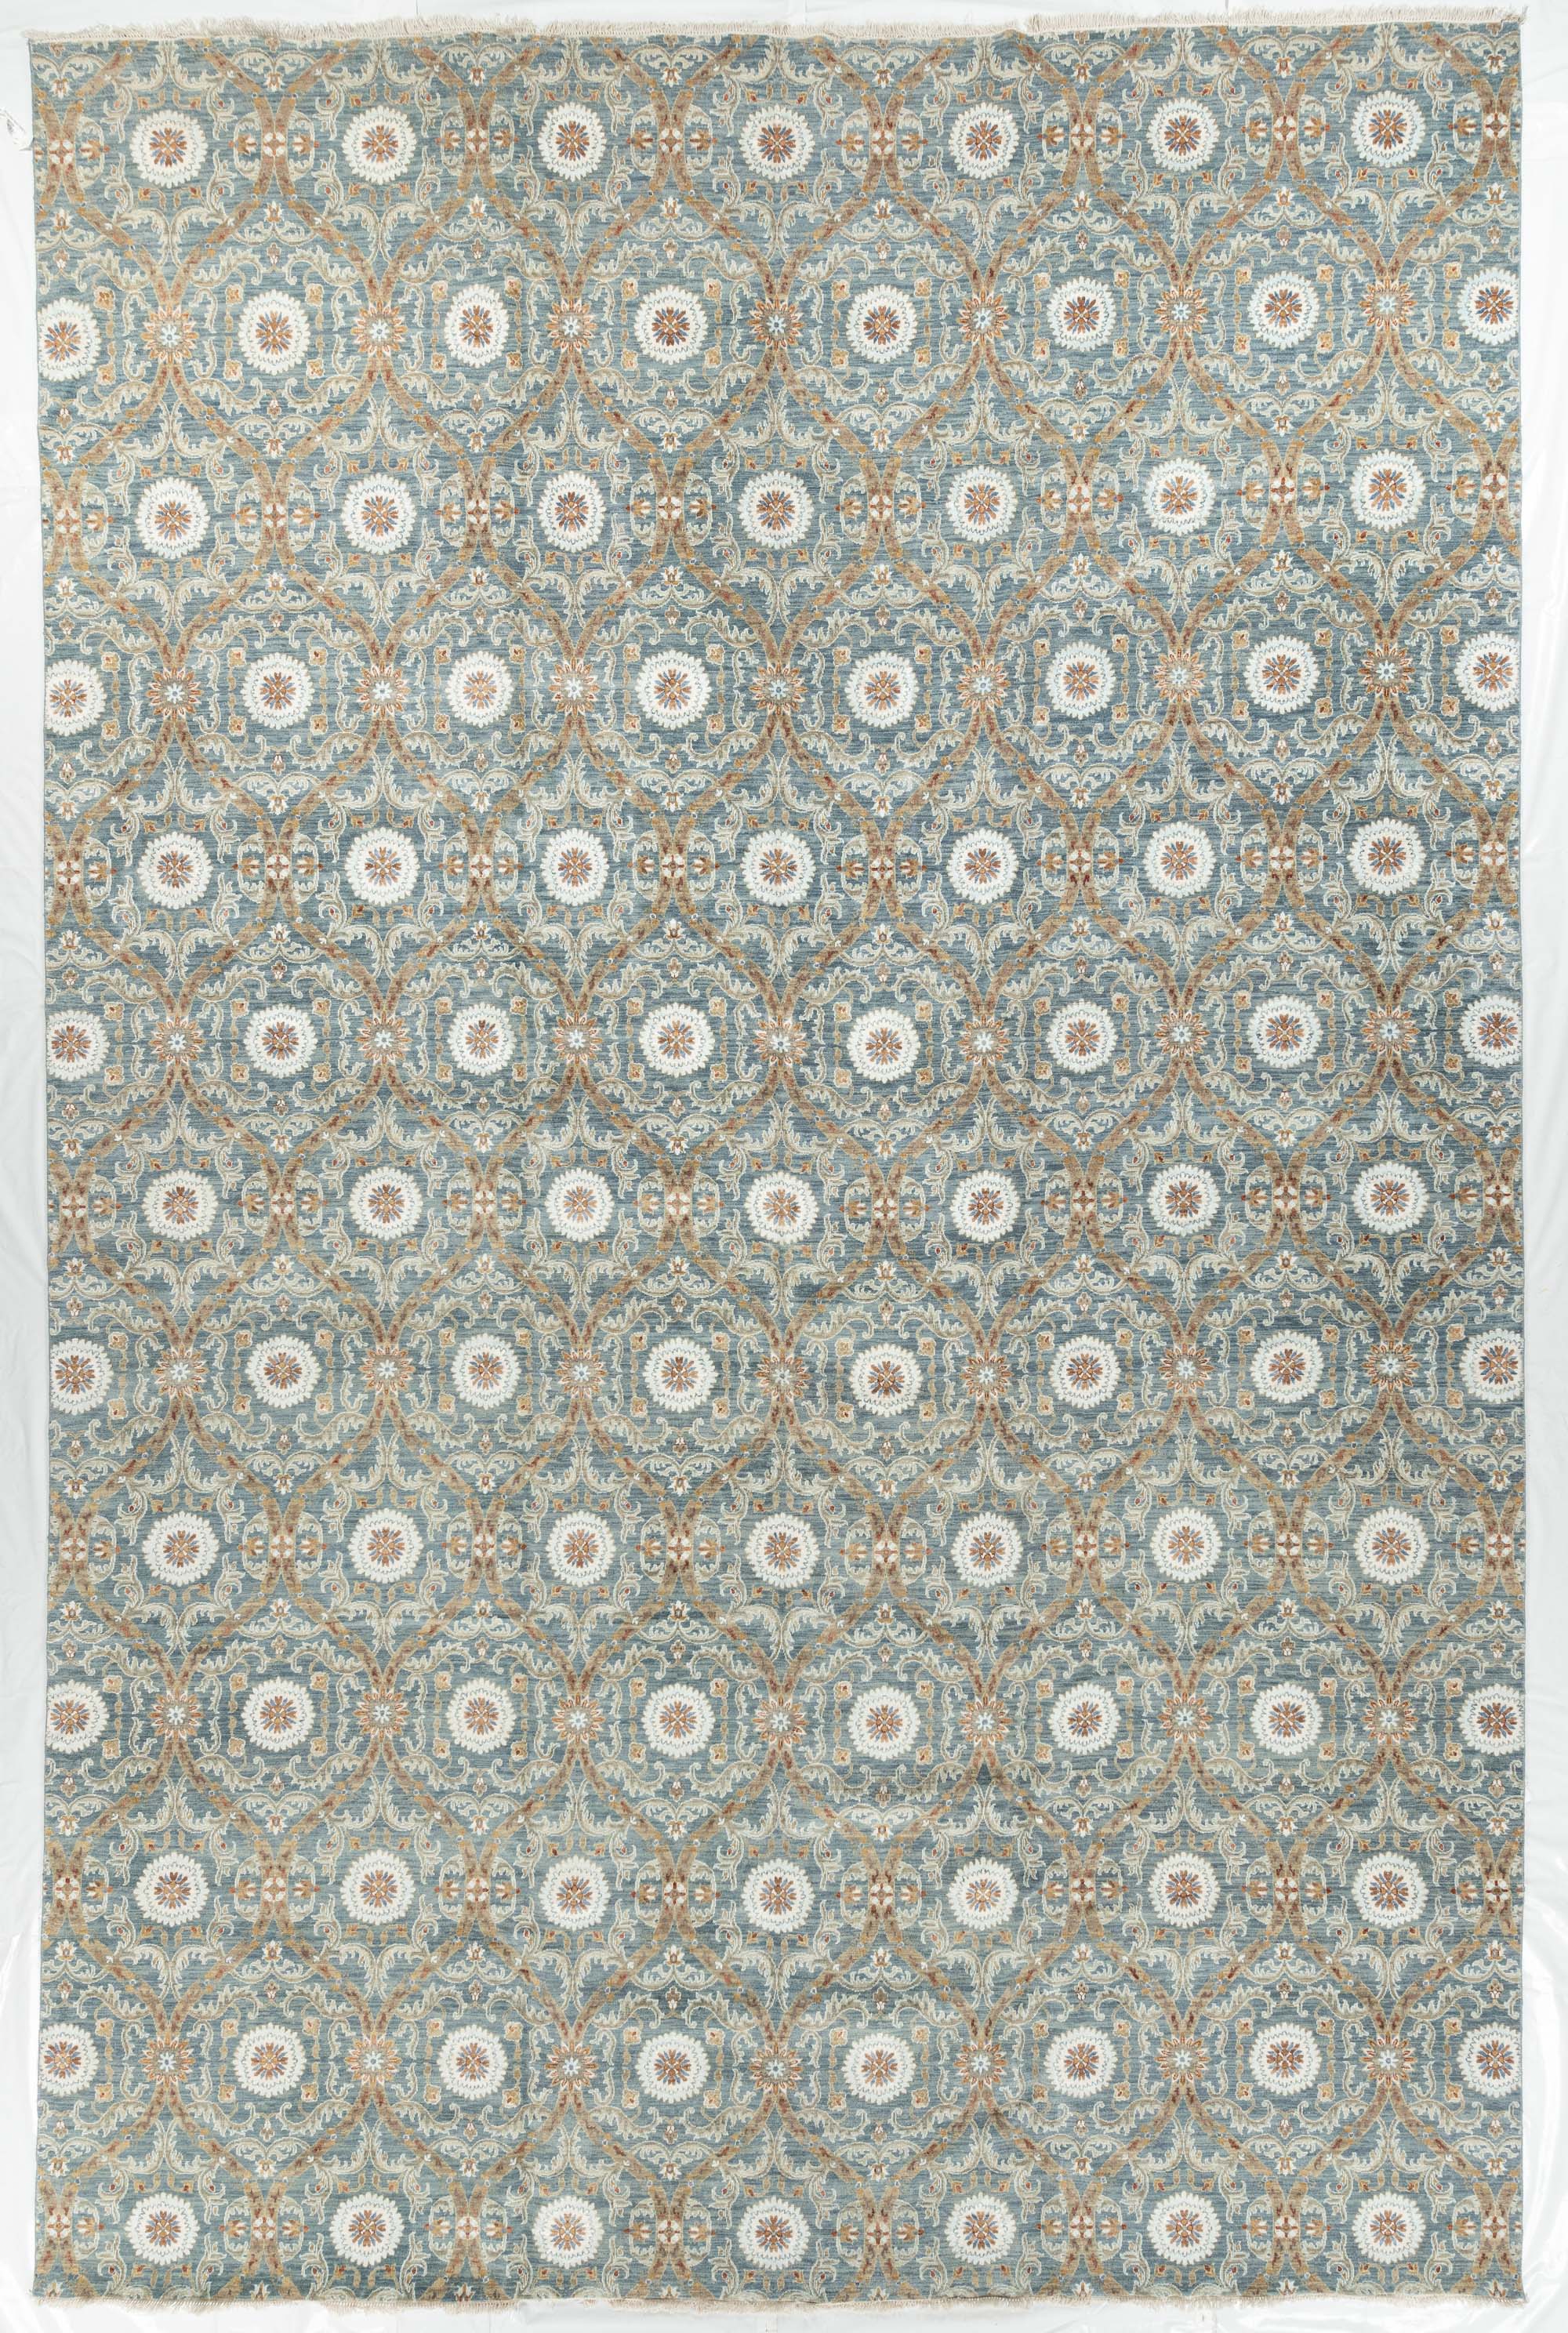 New Indian Contemporary Design Rug <br> 13'3 x 20'2